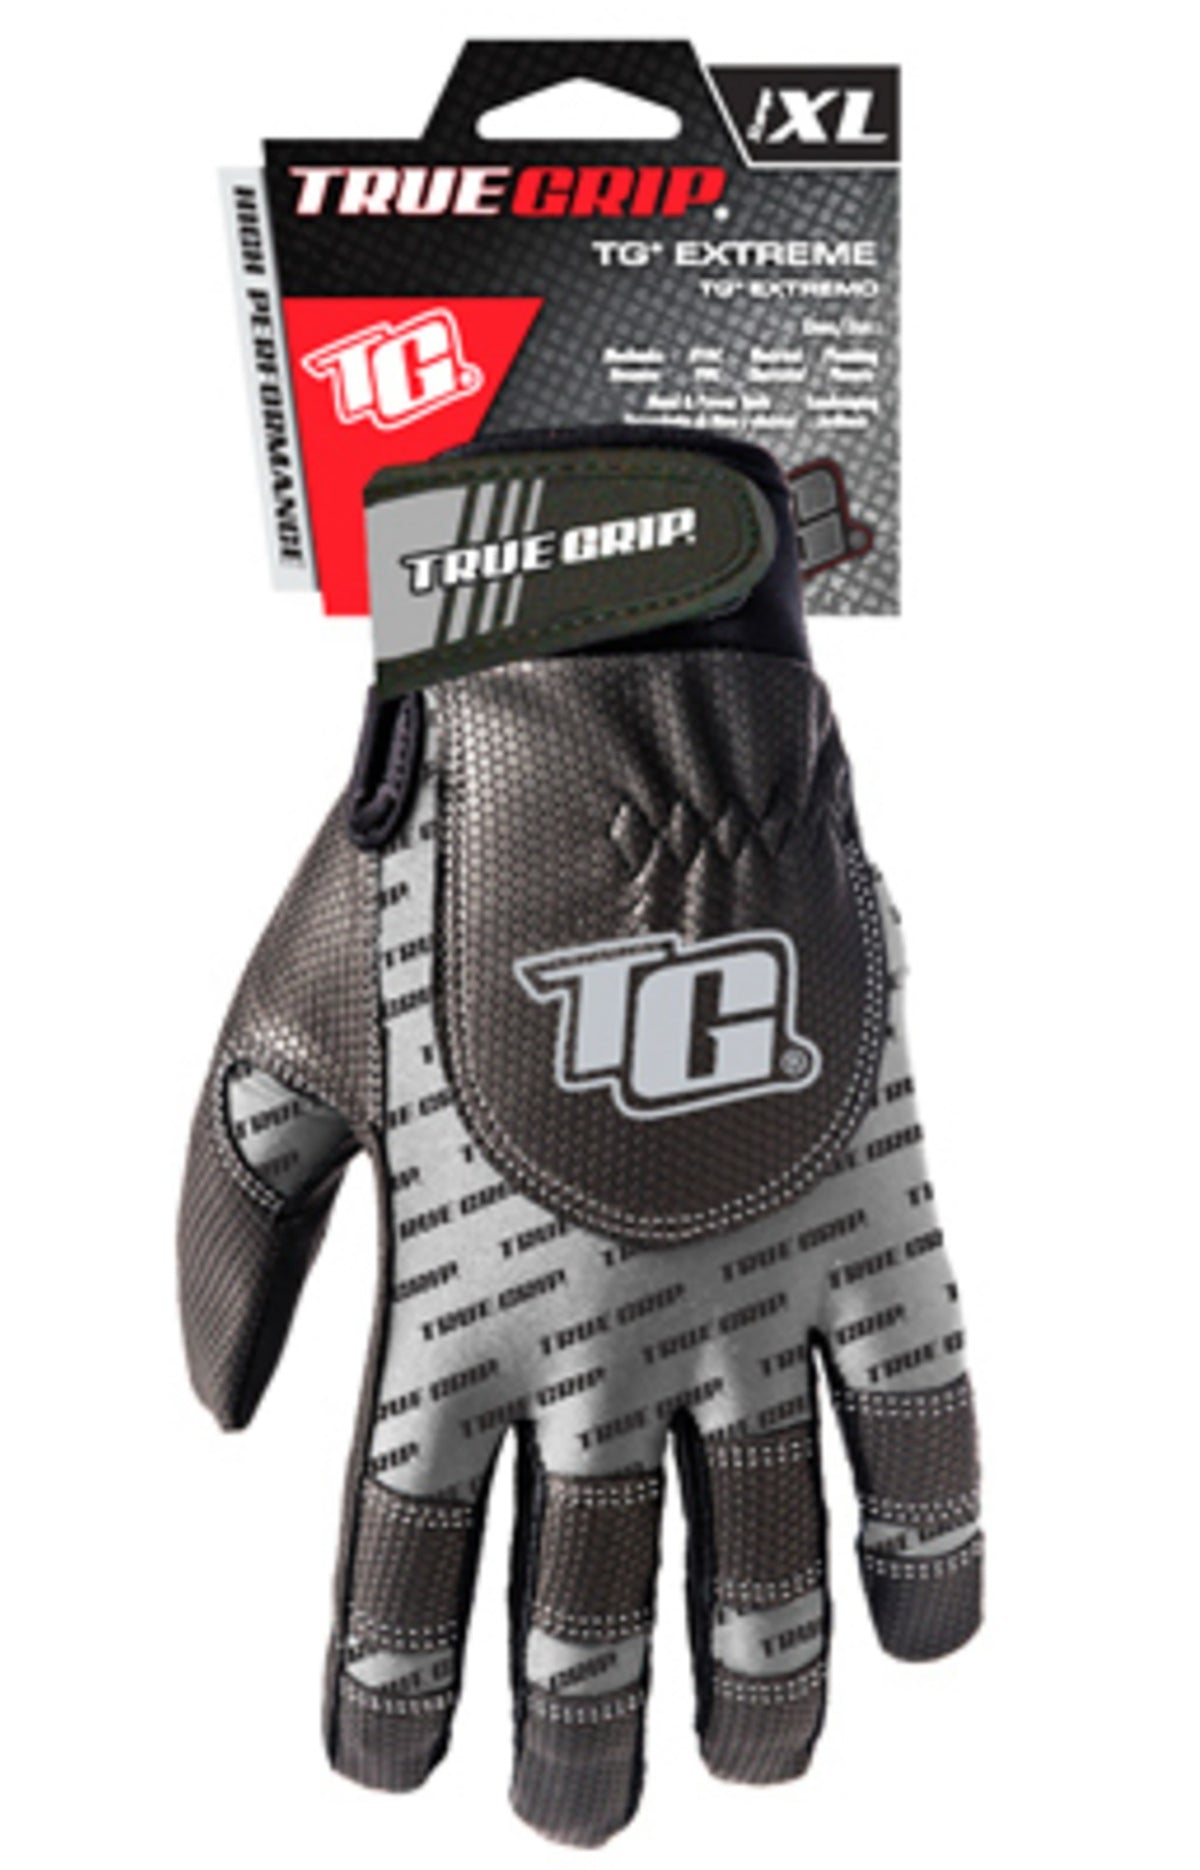 True Grip 9898-23 Extreme Work Gloves, Extra Large